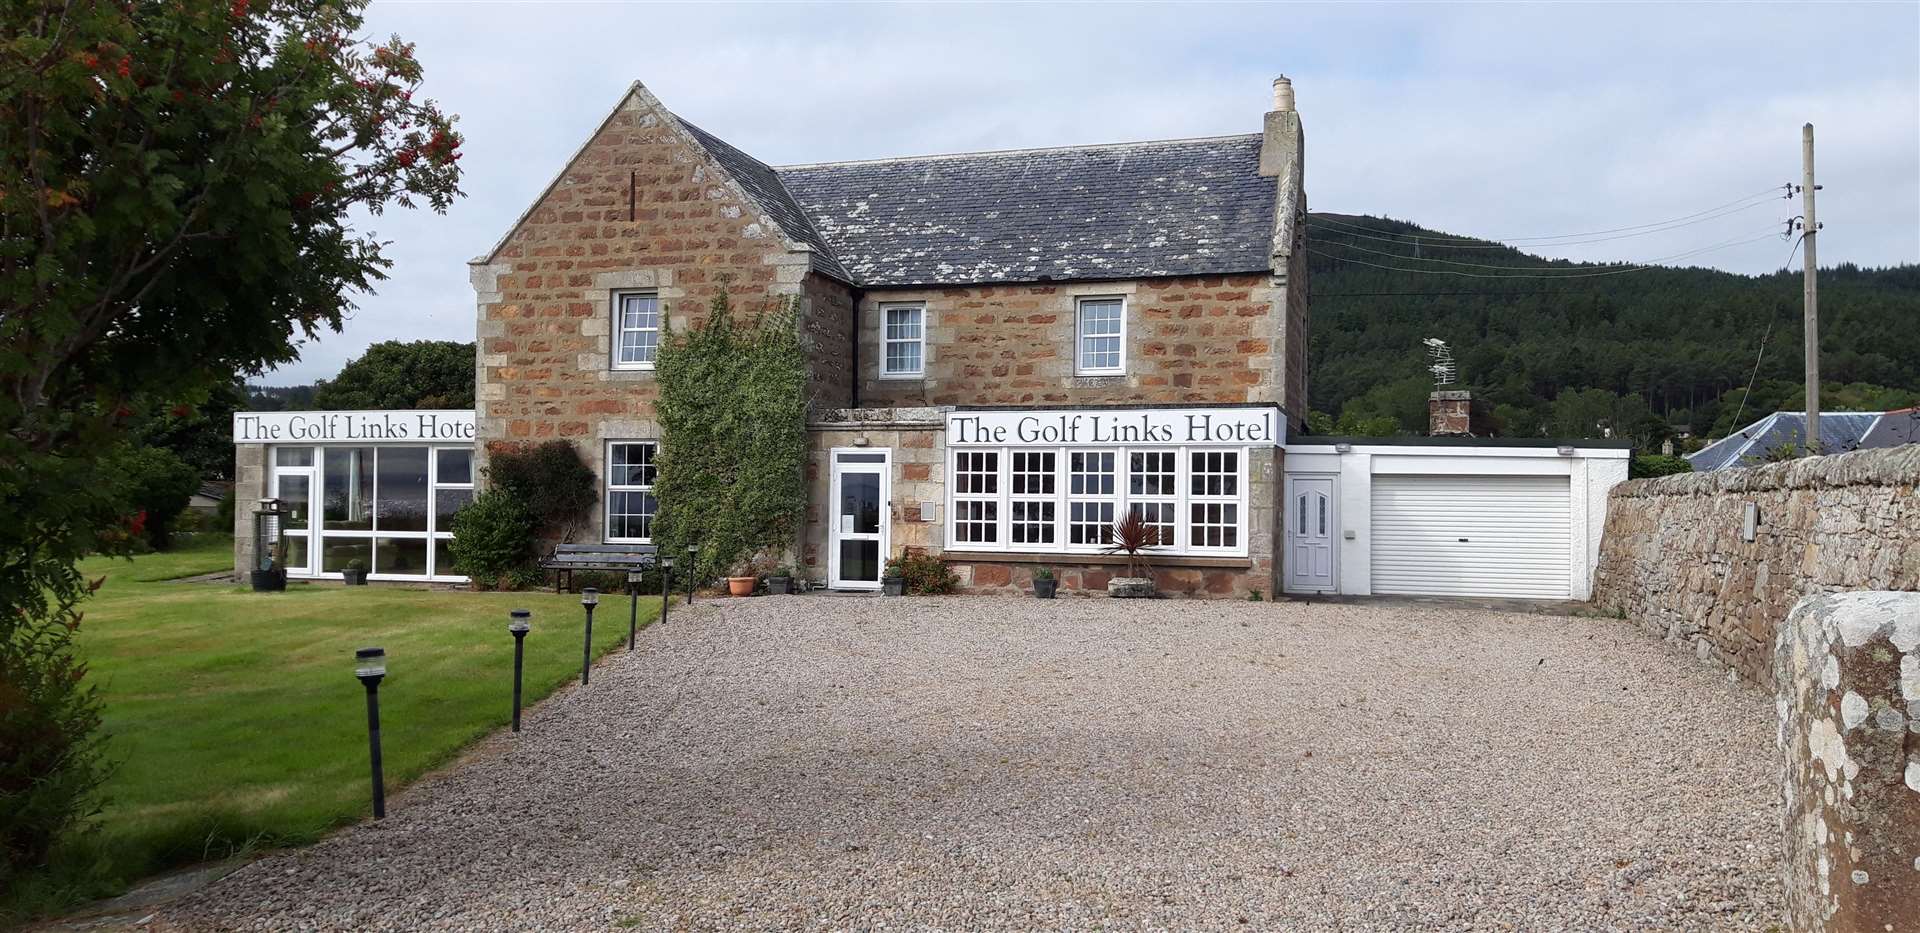 The historic, nine-bedroom Golf Links Hotel enjoys an enviable position on Church Street, close to Golspie golf course and overlooking the sea.